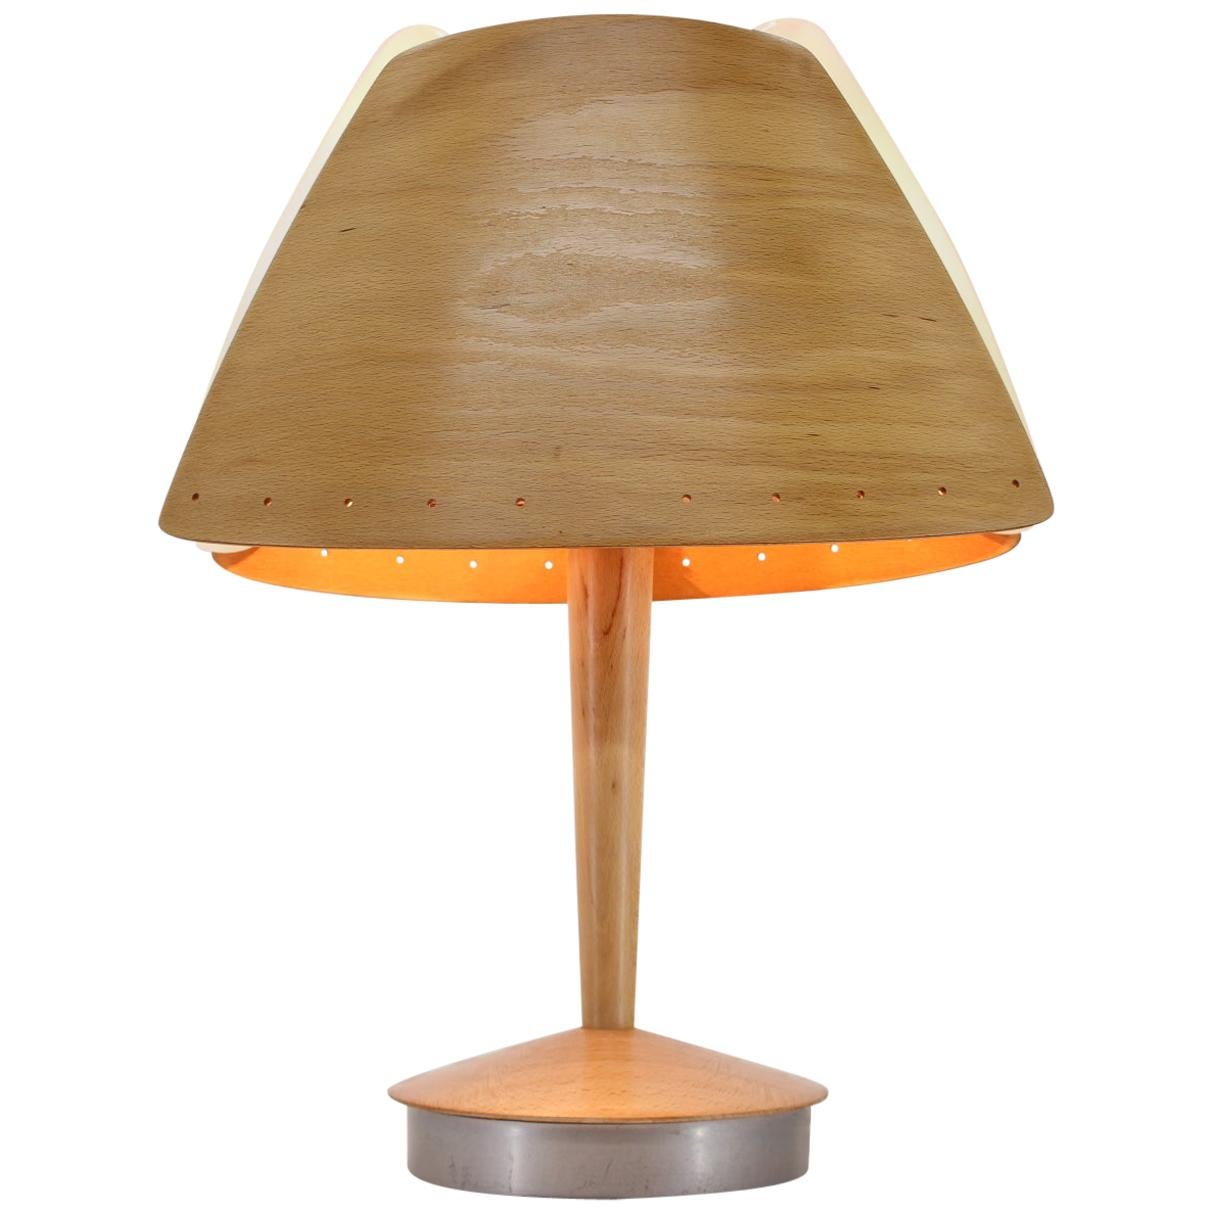 Midcentury French Design Wooden Table Lamp by Lucid, 1970s, Renovated For Sale